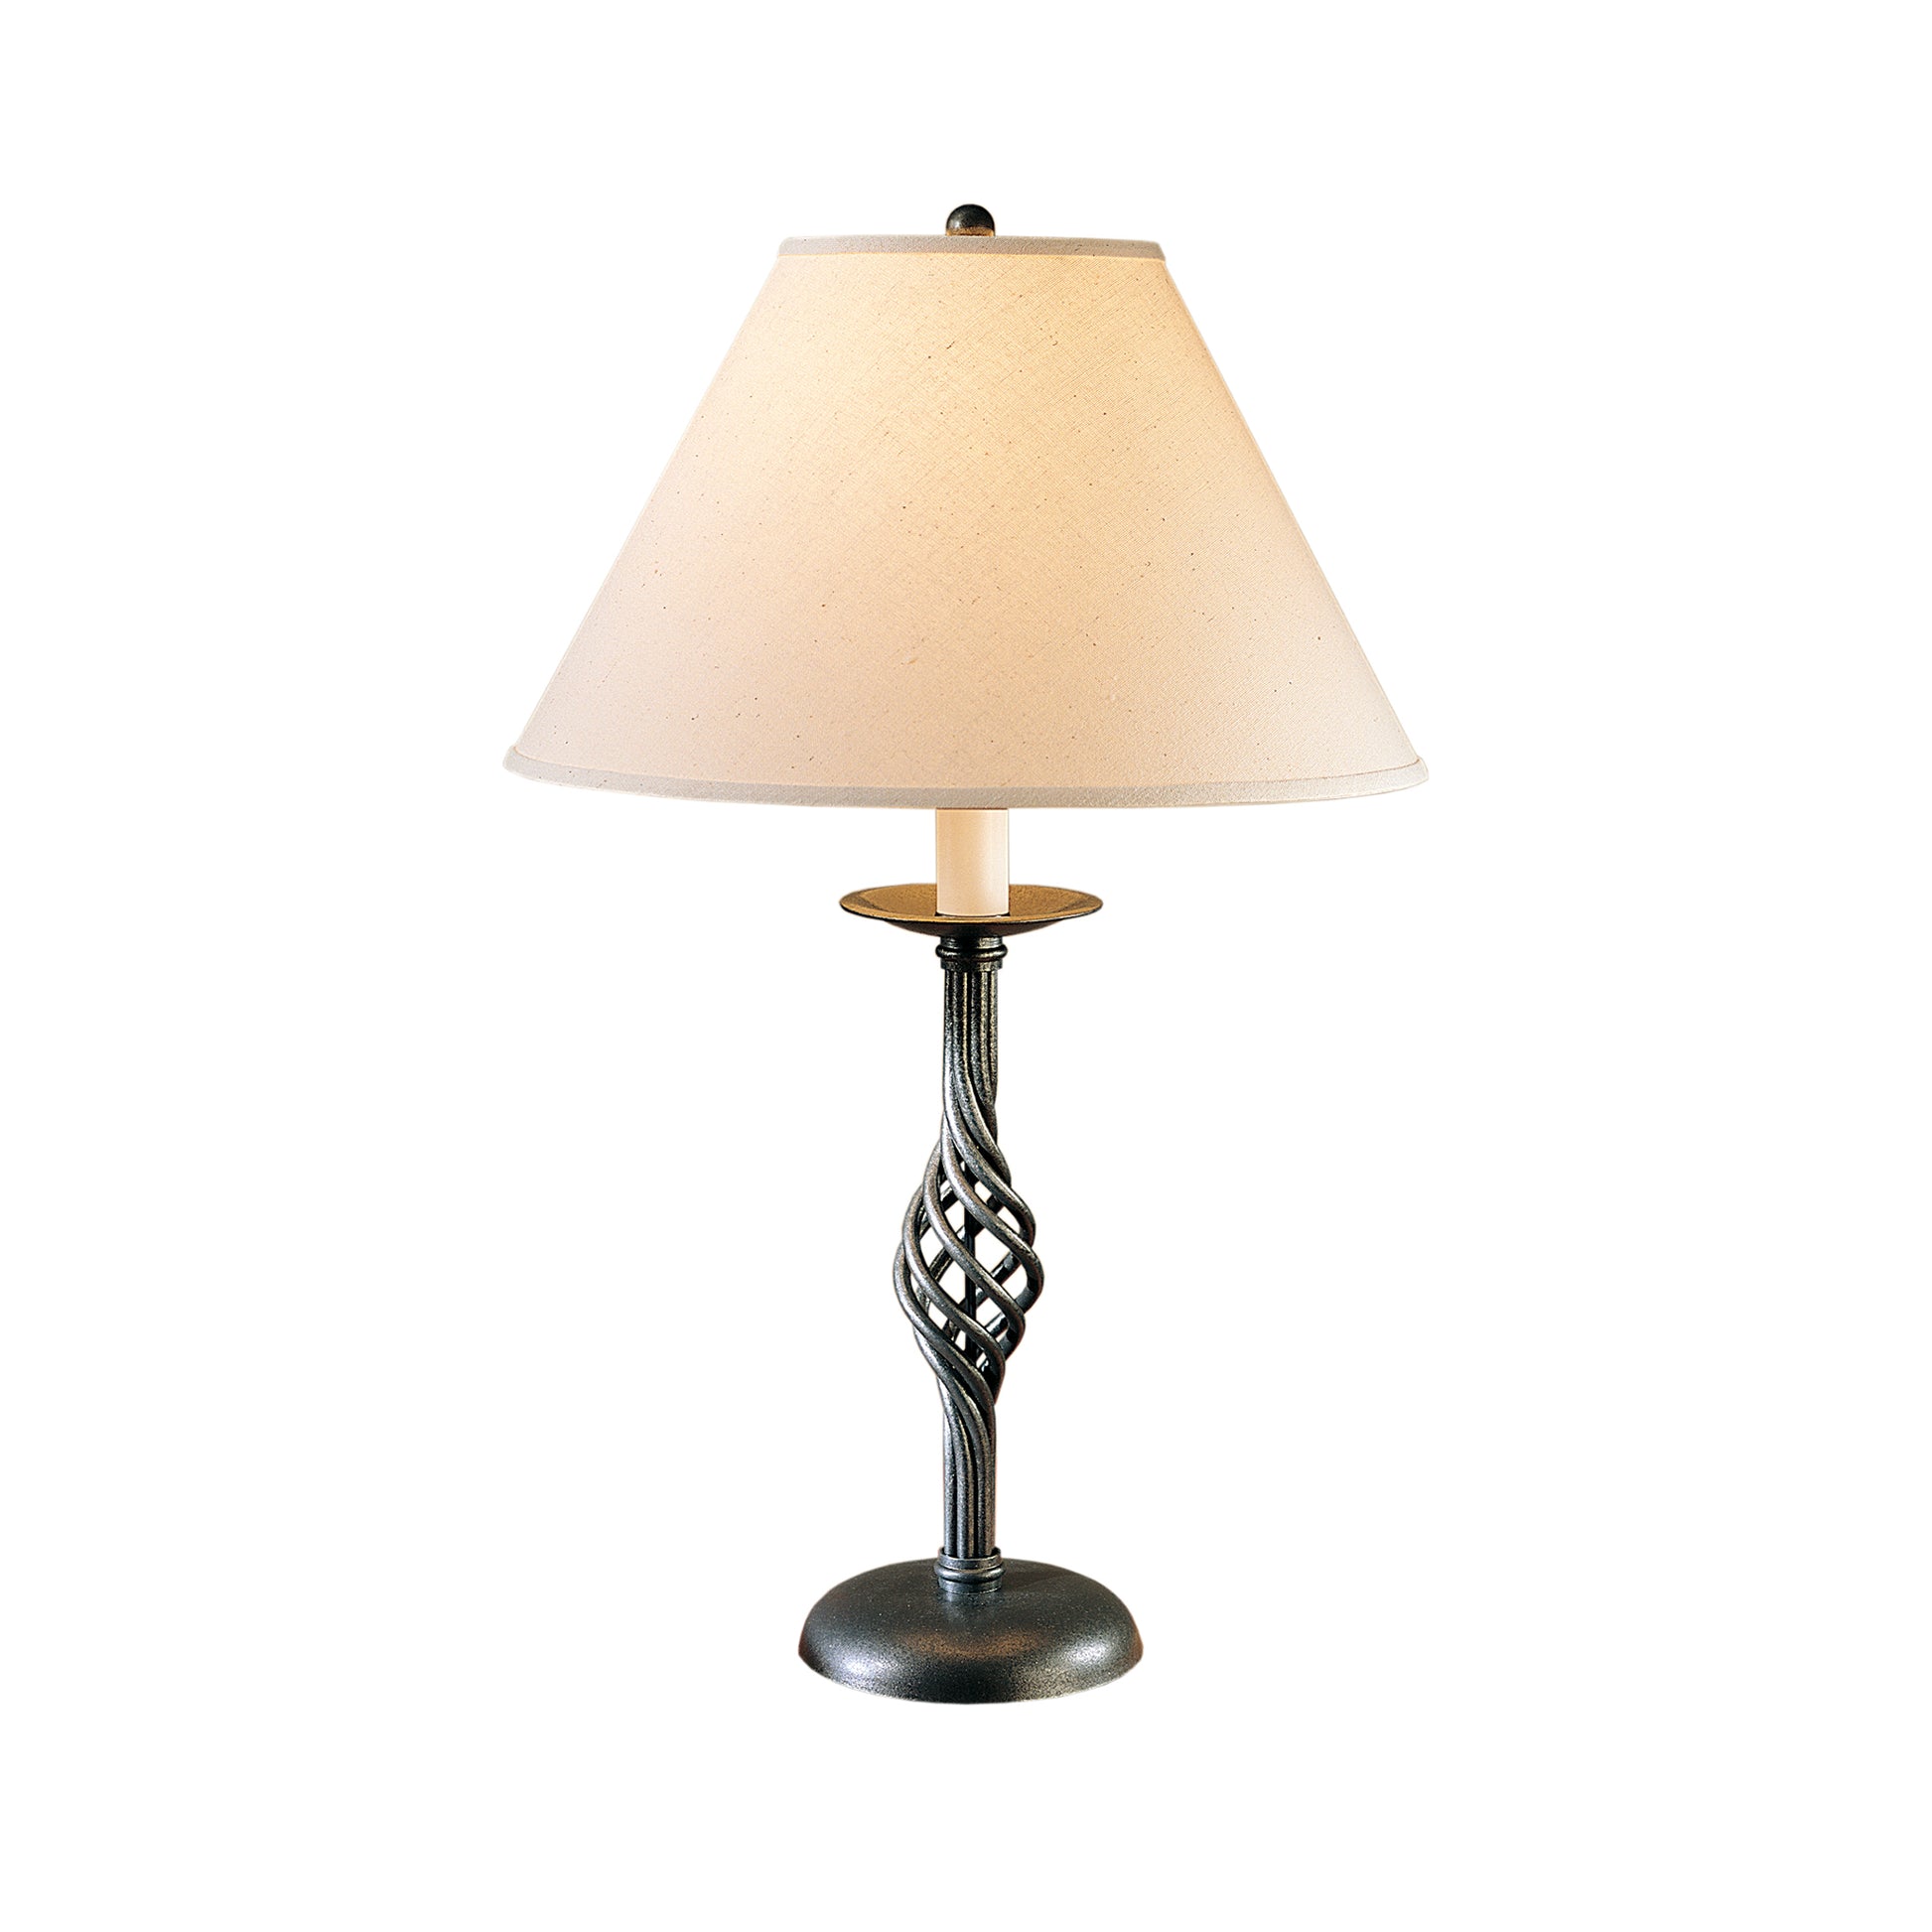 Hubbardton Forge Twist Basket Table Lamp with a hand-forged iron base and a tapered beige lampshade, isolated on a white background.